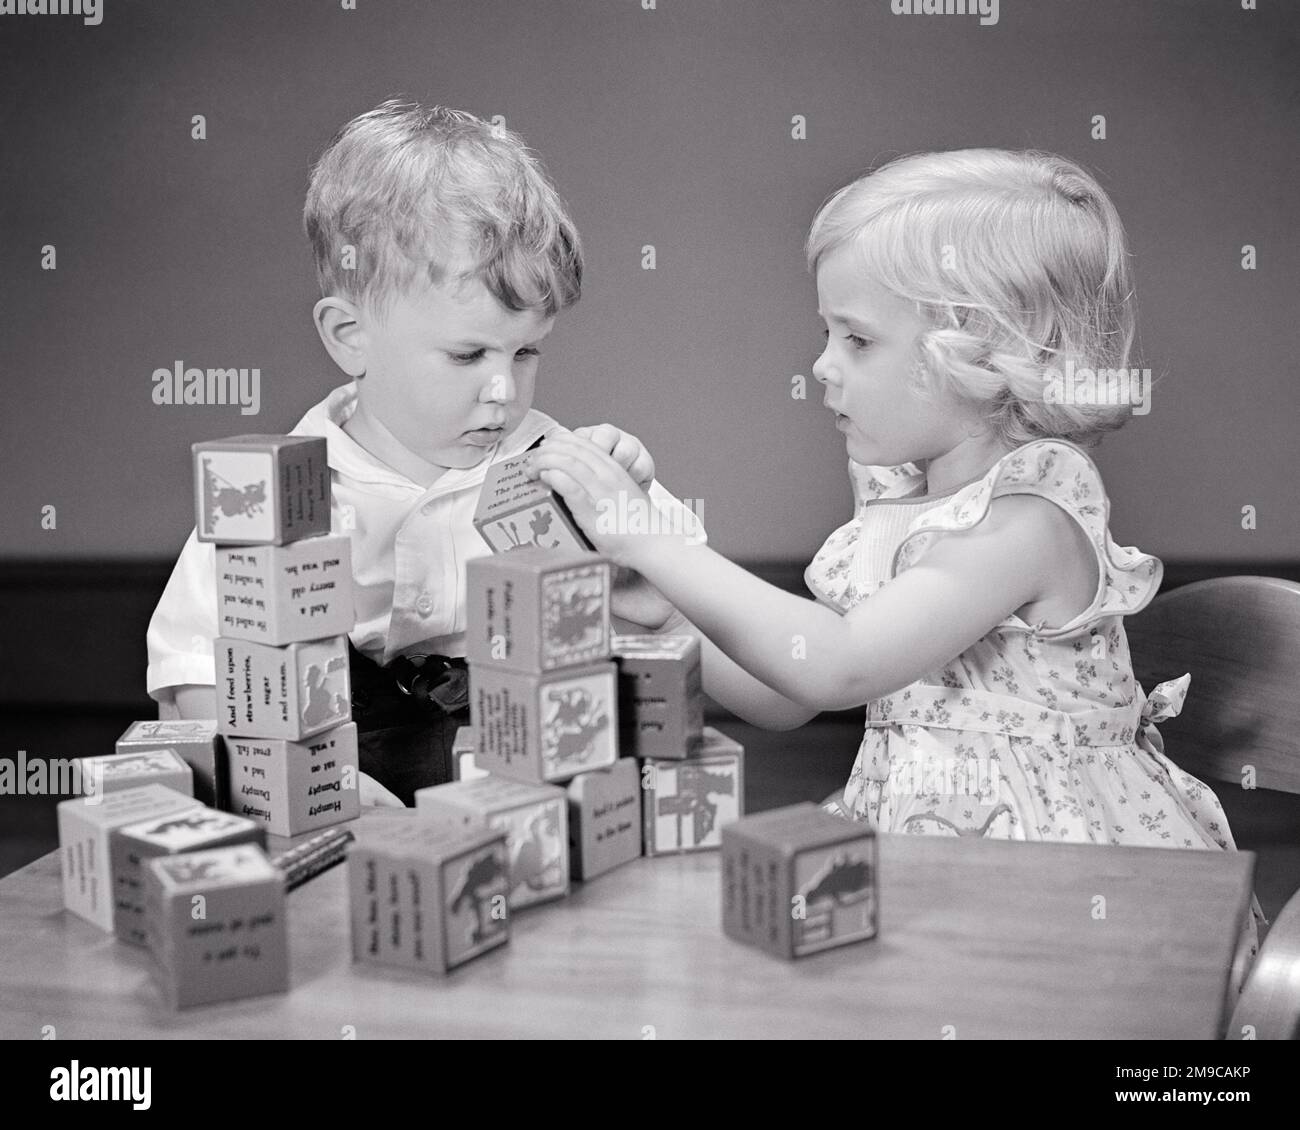 1940s LITTLE BLOND BOY AND GIRL BROTHER AND SISTER SHARING PLAYING TOGETHER WITH CREATIVE WOODEN BUILDING BLOCKS - j10492 HAR001 HARS FEMALES BROTHERS STUDIO SHOT HOME LIFE FRIENDSHIP HALF-LENGTH INSPIRATION CARING MALES SIBLINGS CONFIDENCE SISTERS B&W SUCCESS HAPPINESS DISCOVERY STRENGTH NETWORKING CHOICE LEADERSHIP POWERFUL RECREATION PRIDE SIBLING CONCEPTUAL IMAGINATION STYLISH COOPERATION CREATIVITY GROWTH JUVENILES PRECISION TOGETHERNESS BLACK AND WHITE CAUCASIAN ETHNICITY HAR001 OLD FASHIONED Stock Photo